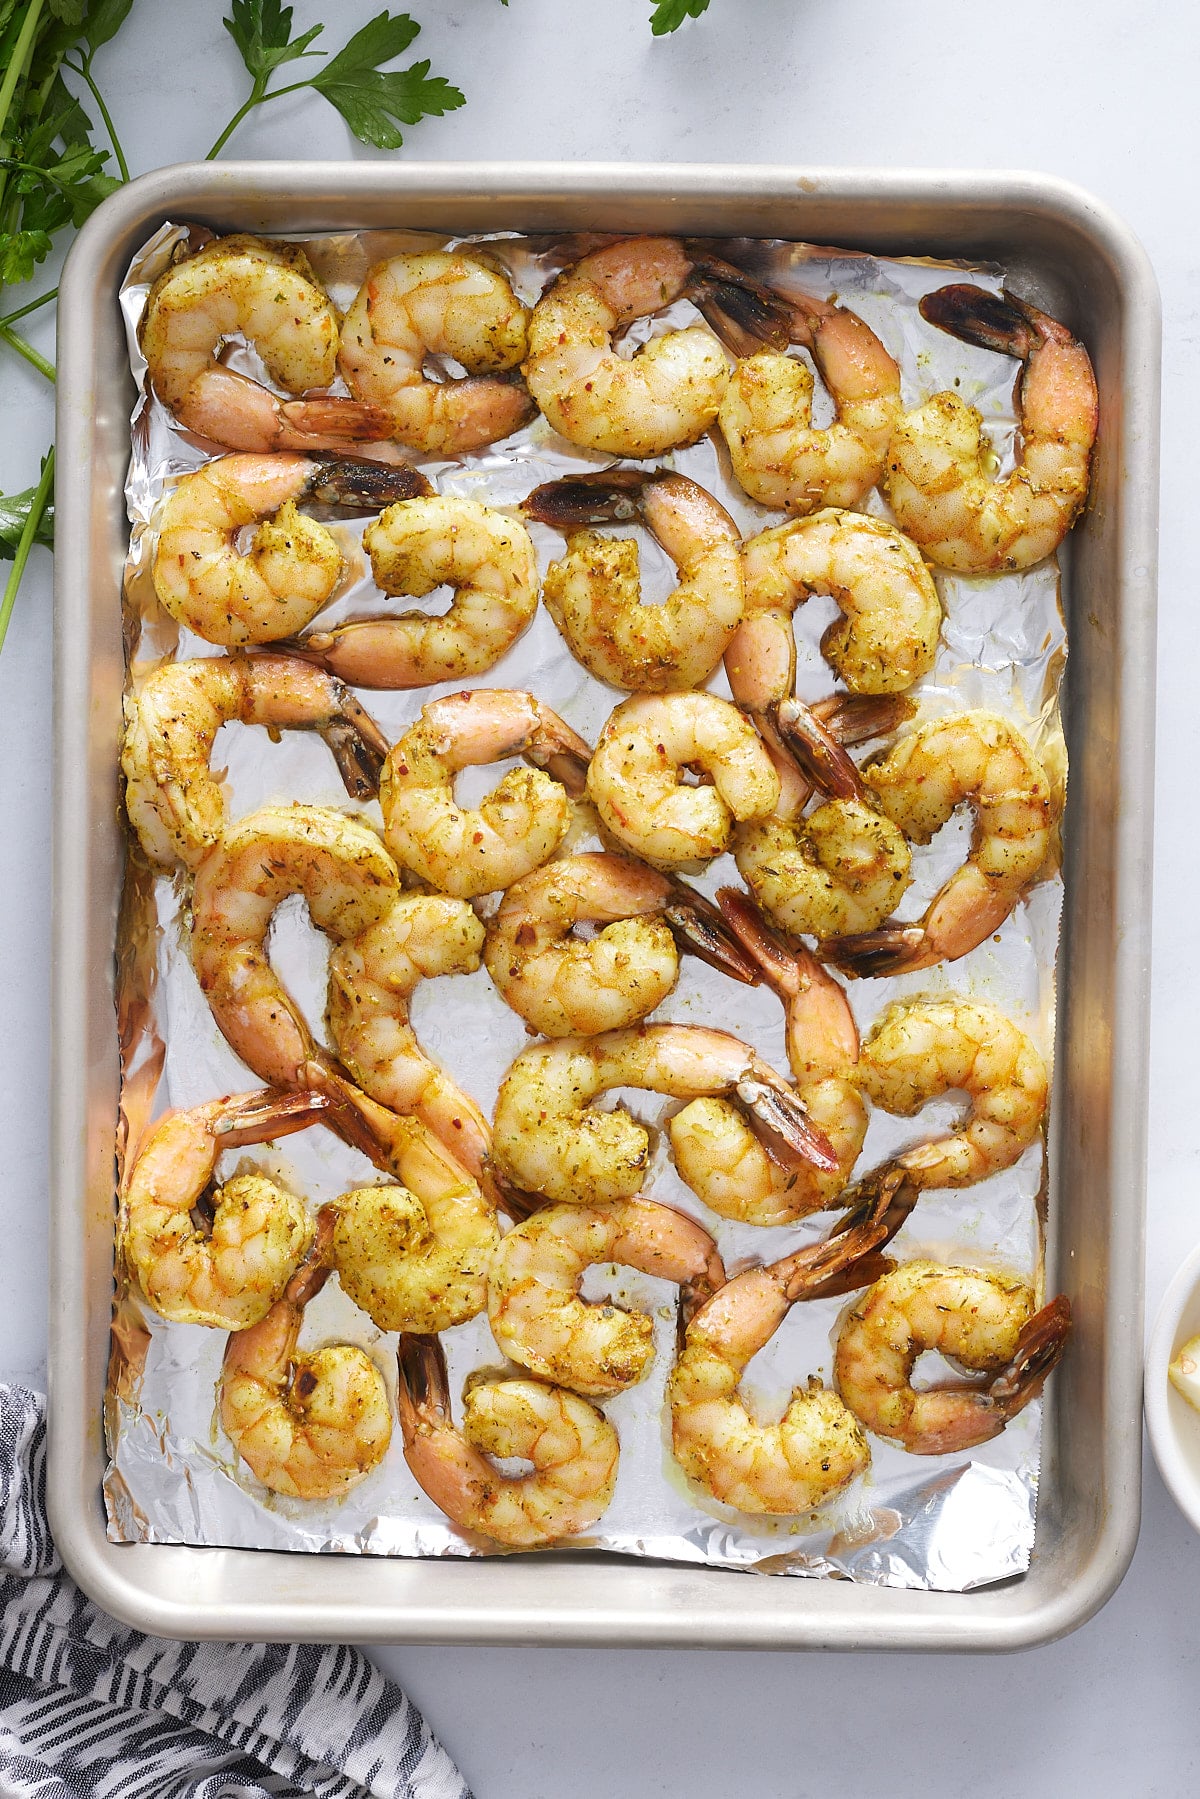 How to Cook Shrimp in an Air Fryer, Skillet, or Oven